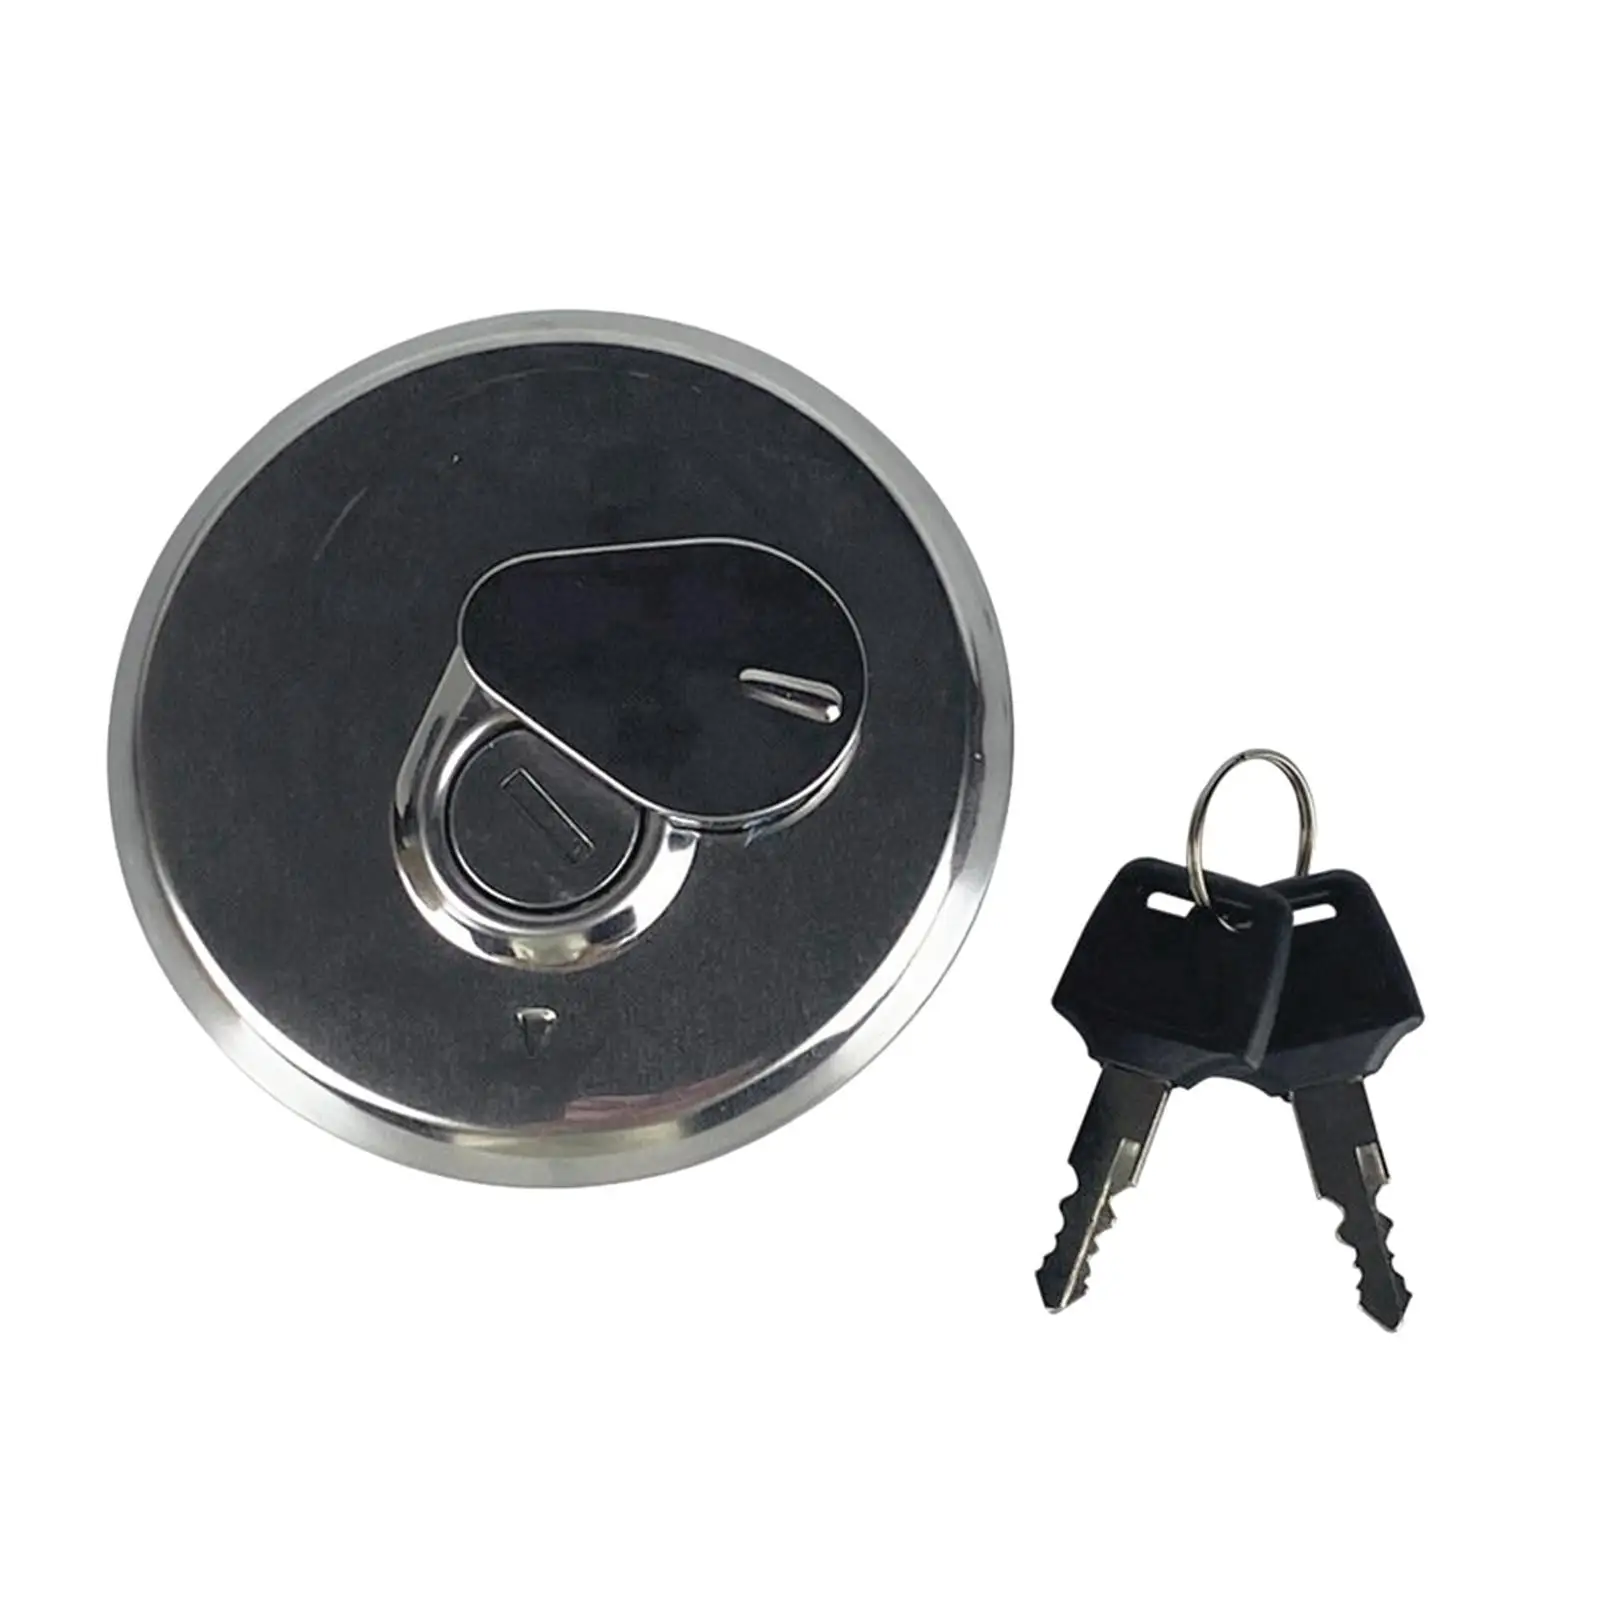 Motorbike Fuel Gas Tank Cap Cover Replaces with Keys for Suzuki Gn125